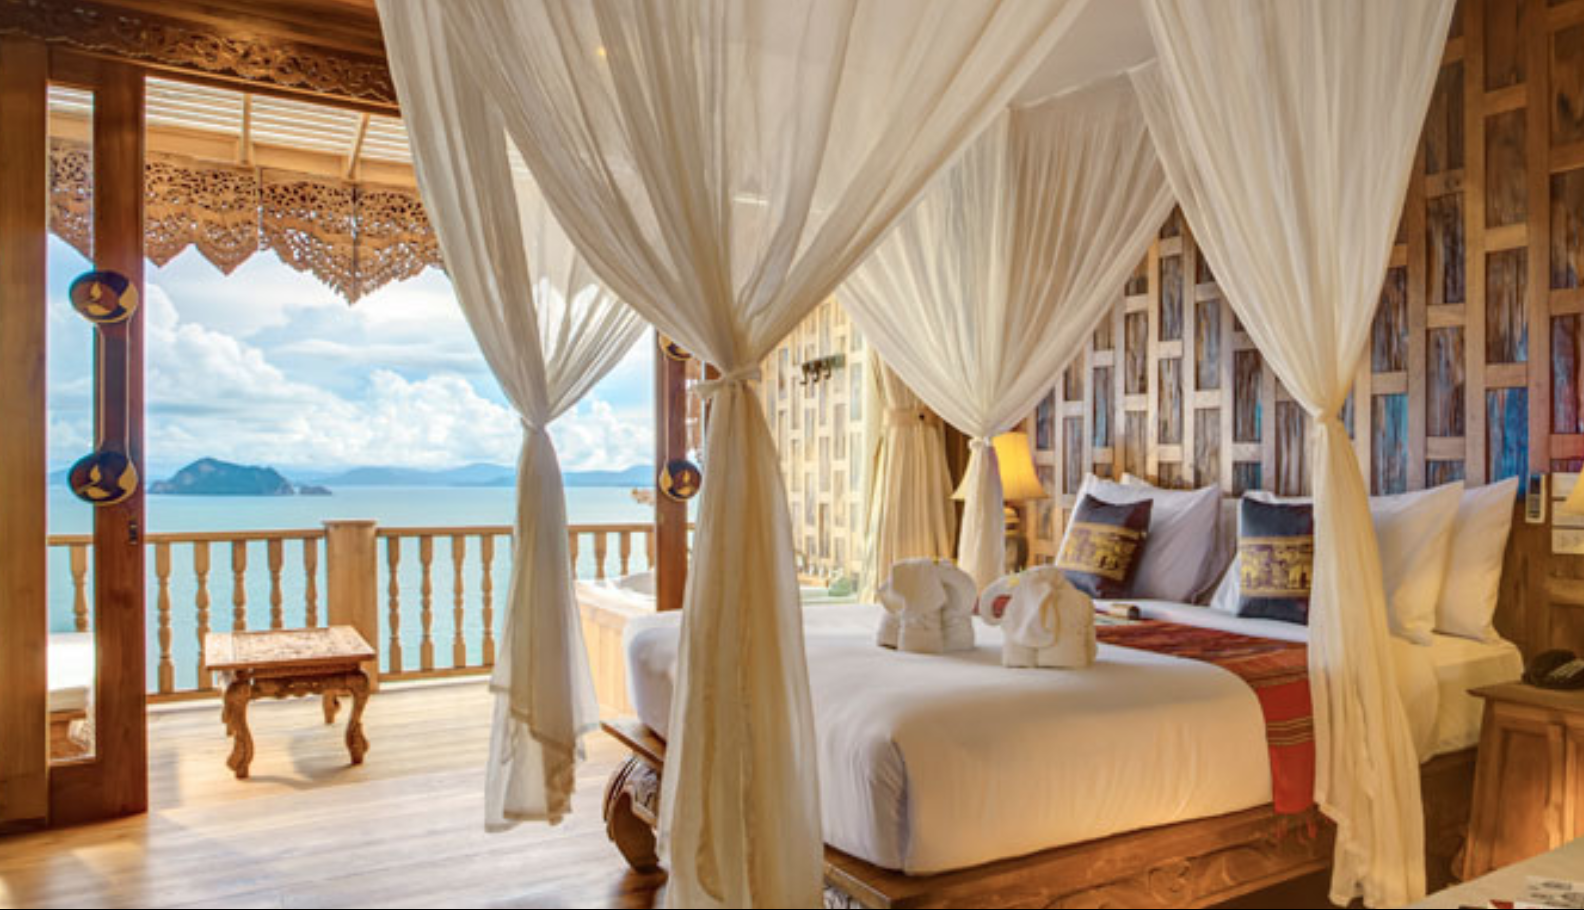 8 Hotels In Southeast Asia With Spectacular Bedside Views